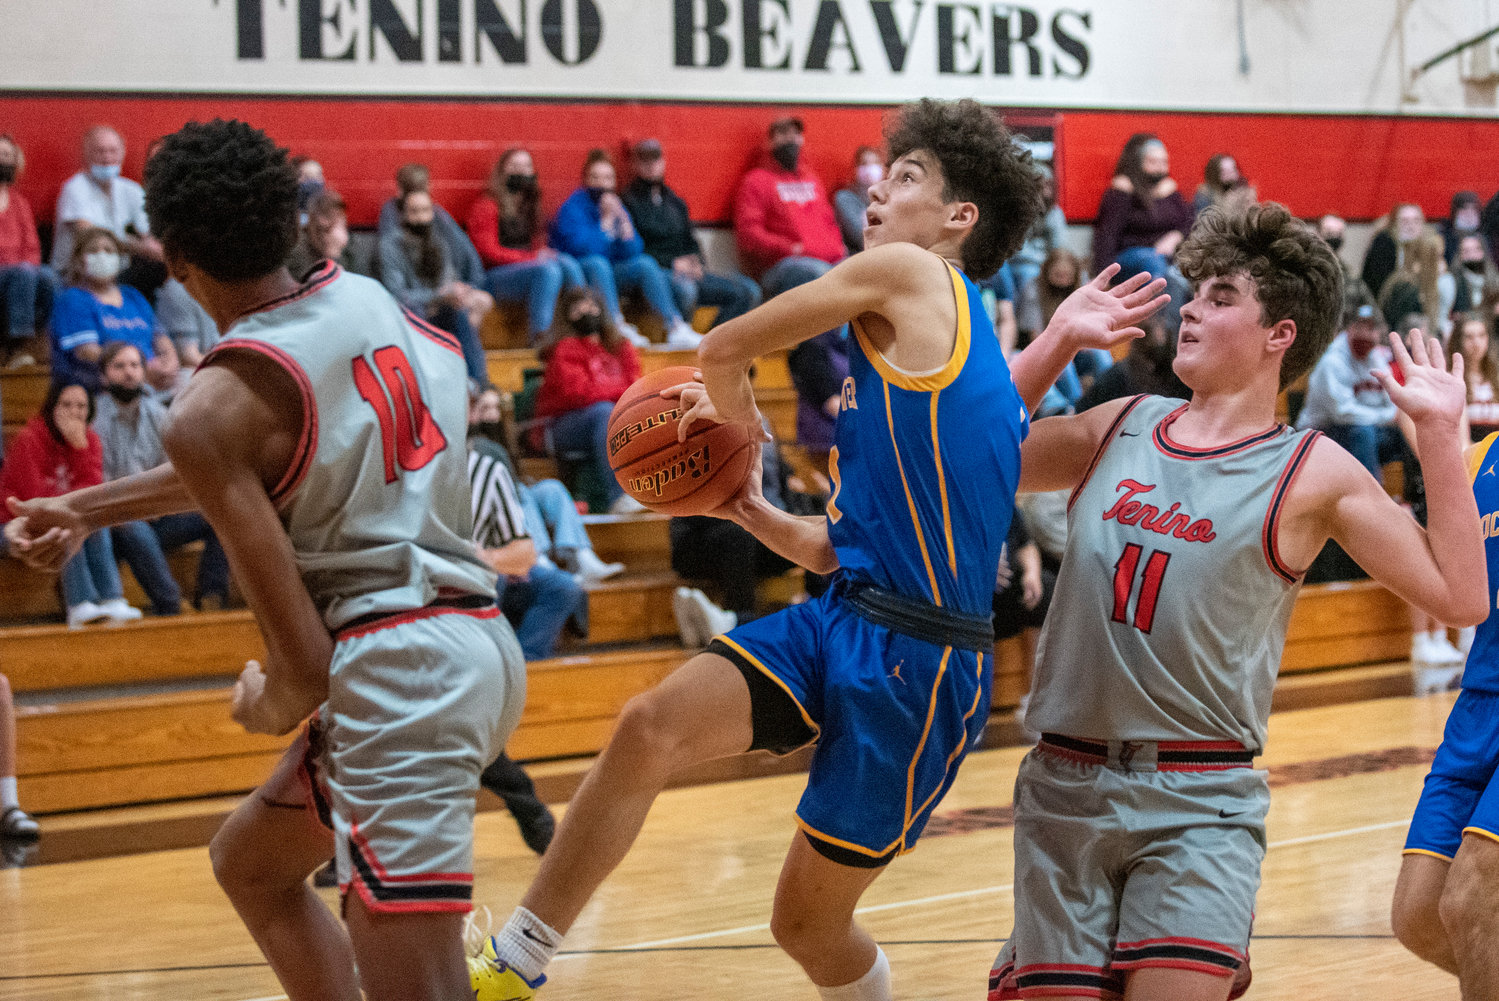 Rochester's Parker McAferty  drives to the bucket against Tenino on Nov. 29.